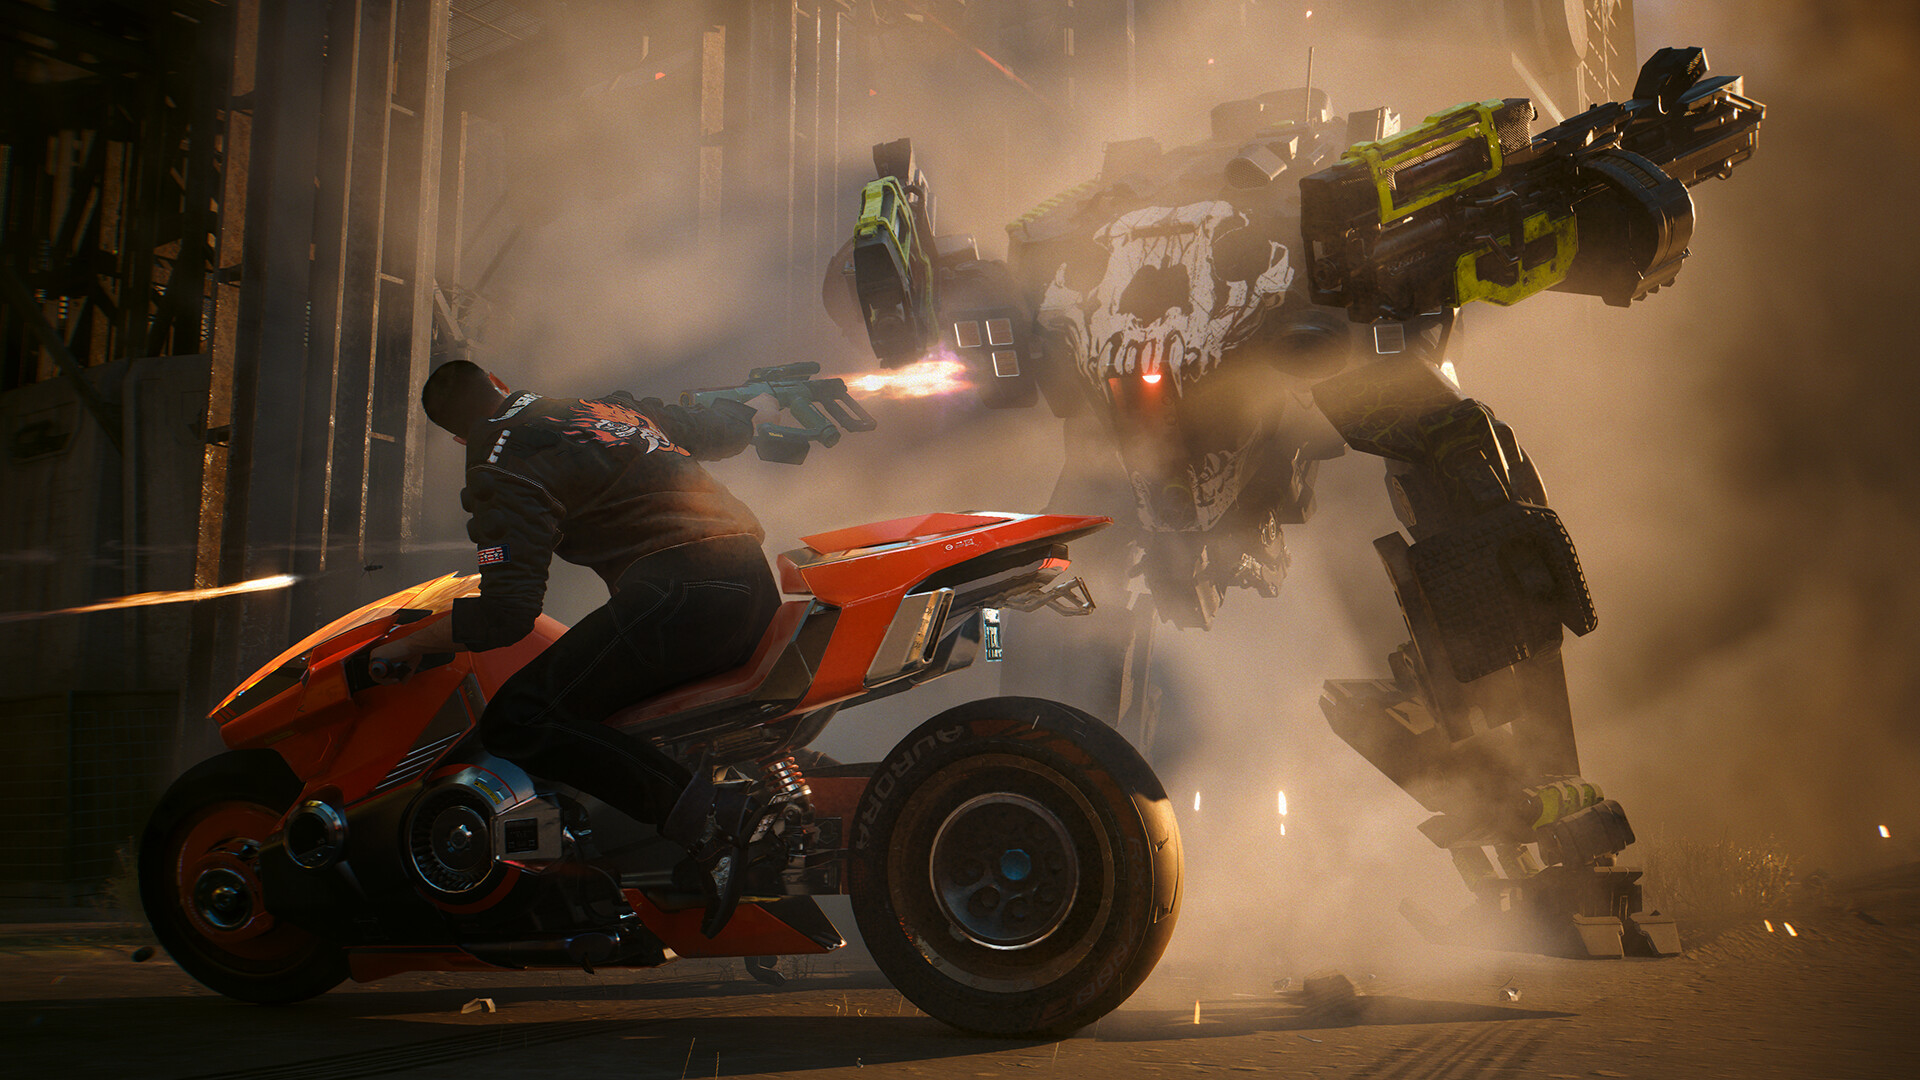 V rides a motorcycle while shooting at a mech in Cyberpunk 2077: Phantom Liberty.